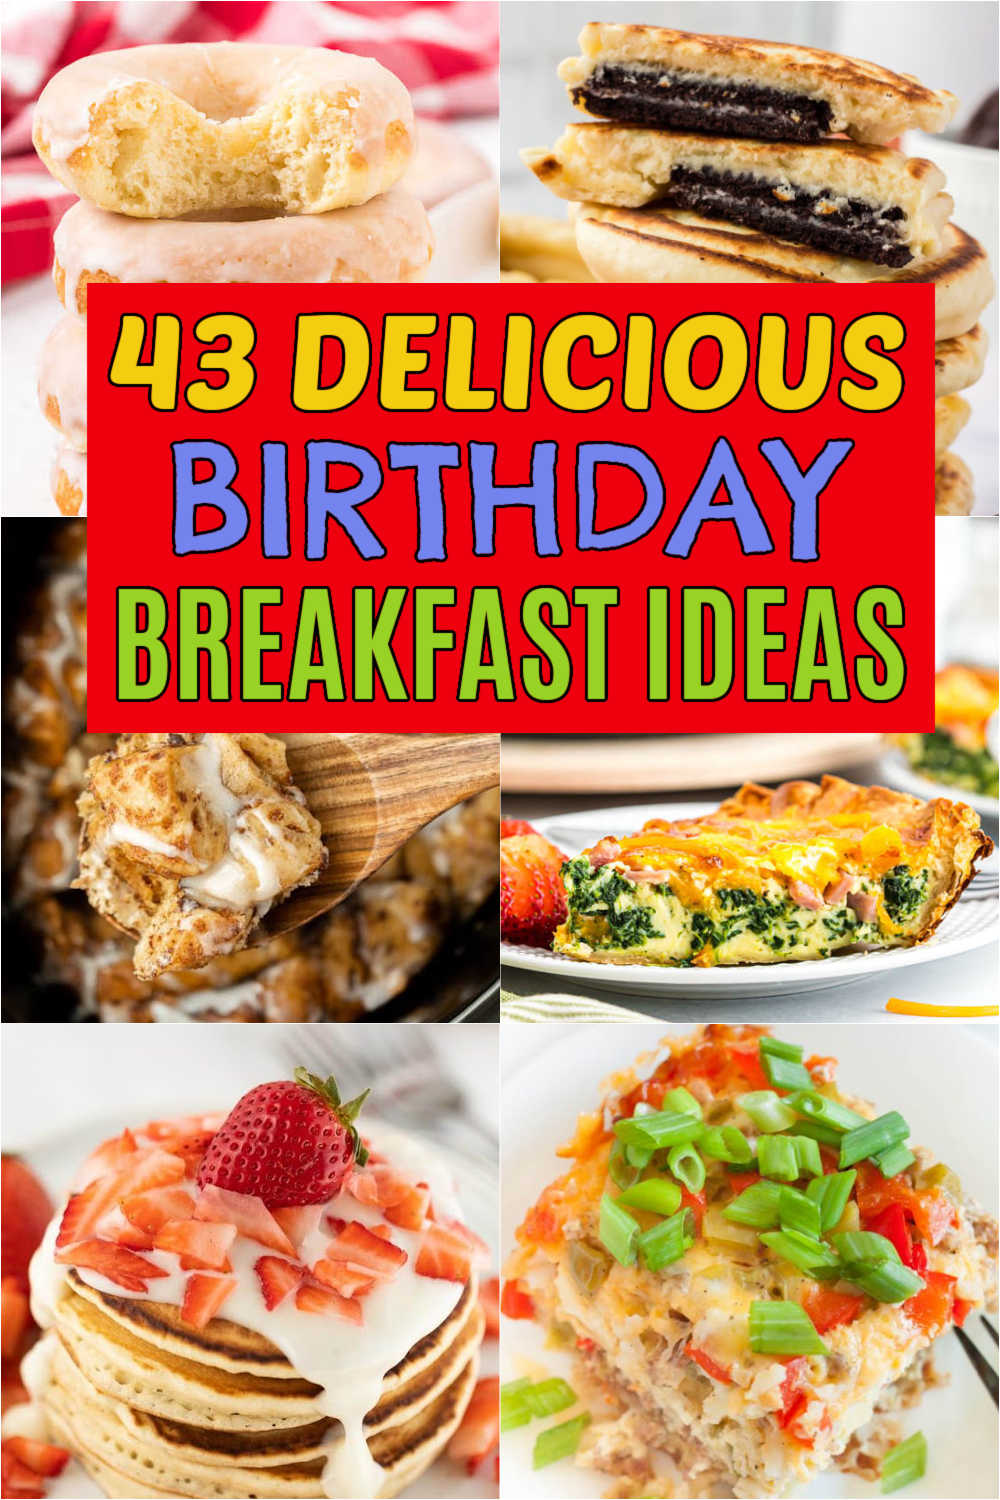 Start their Birthday off right with these Birthday Breakfast Ideas that the entire family will love. Make their Birthday special by making breakfast waffles with sprinkles. These ideas are great for kids or for mom or for dad too!  You’ll love these easy sweet and savory birthday breakfast recipes. #eatingonadime #breakfastrecipes #birthdayfood #breakfastideas 
